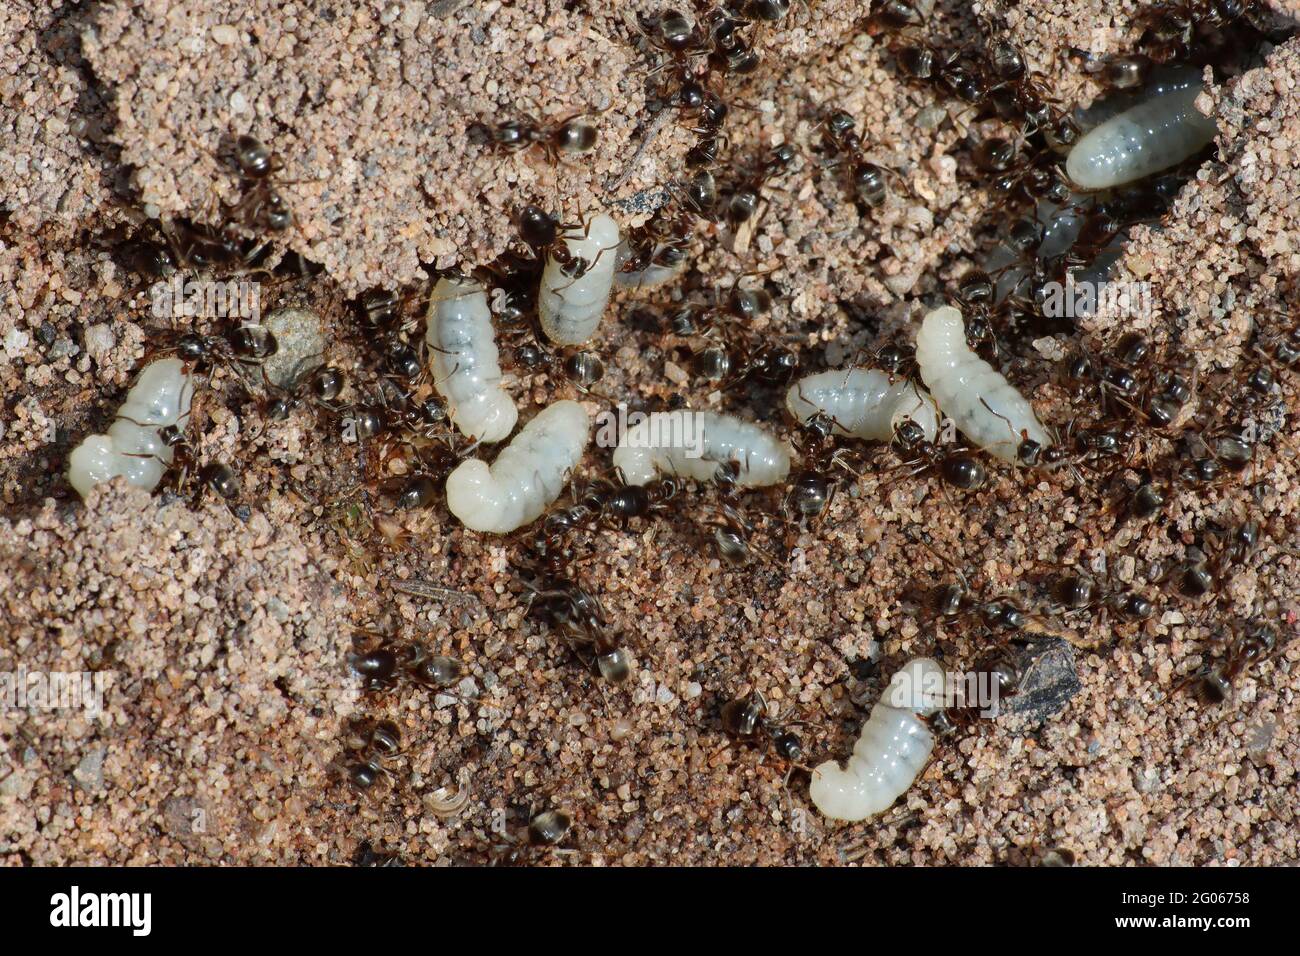 Ants With Larvae Stock Photo